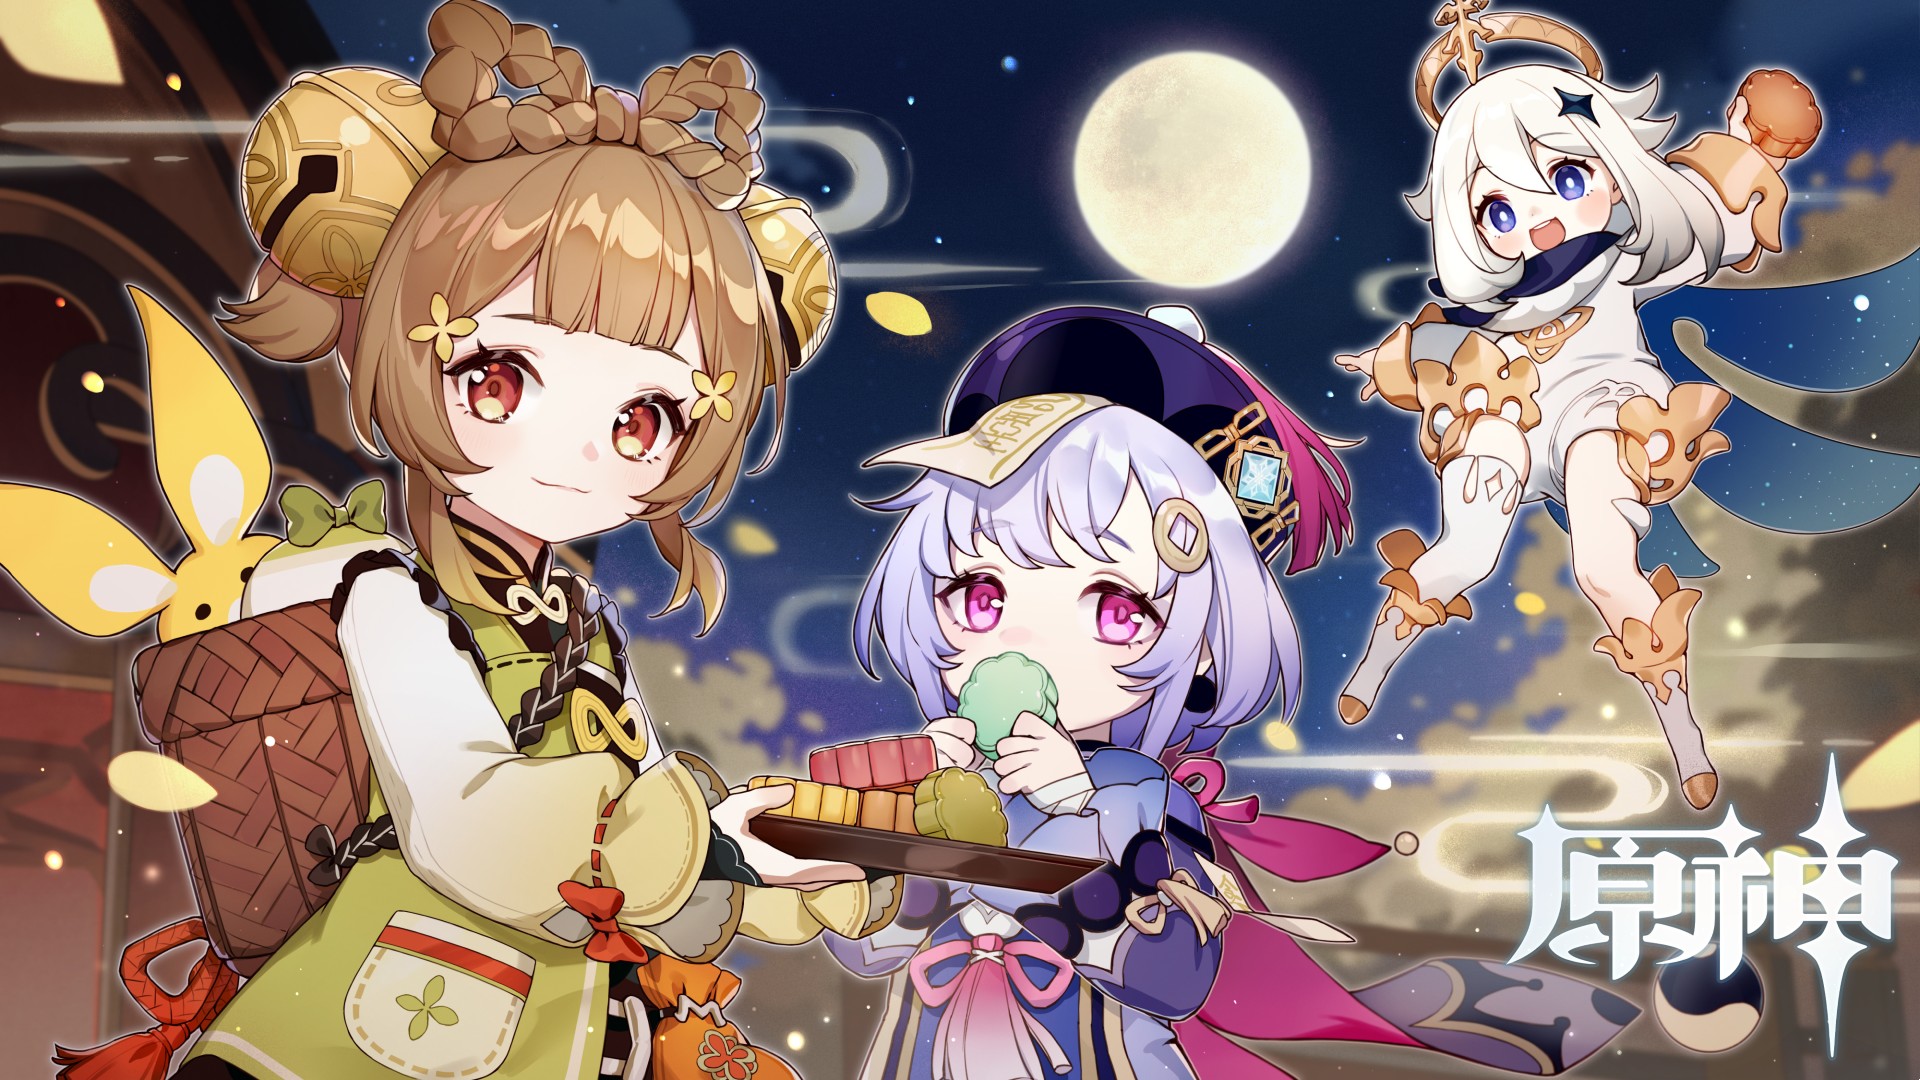 Genshin Impact Yaoyao sharing sweets with other characters during a festival